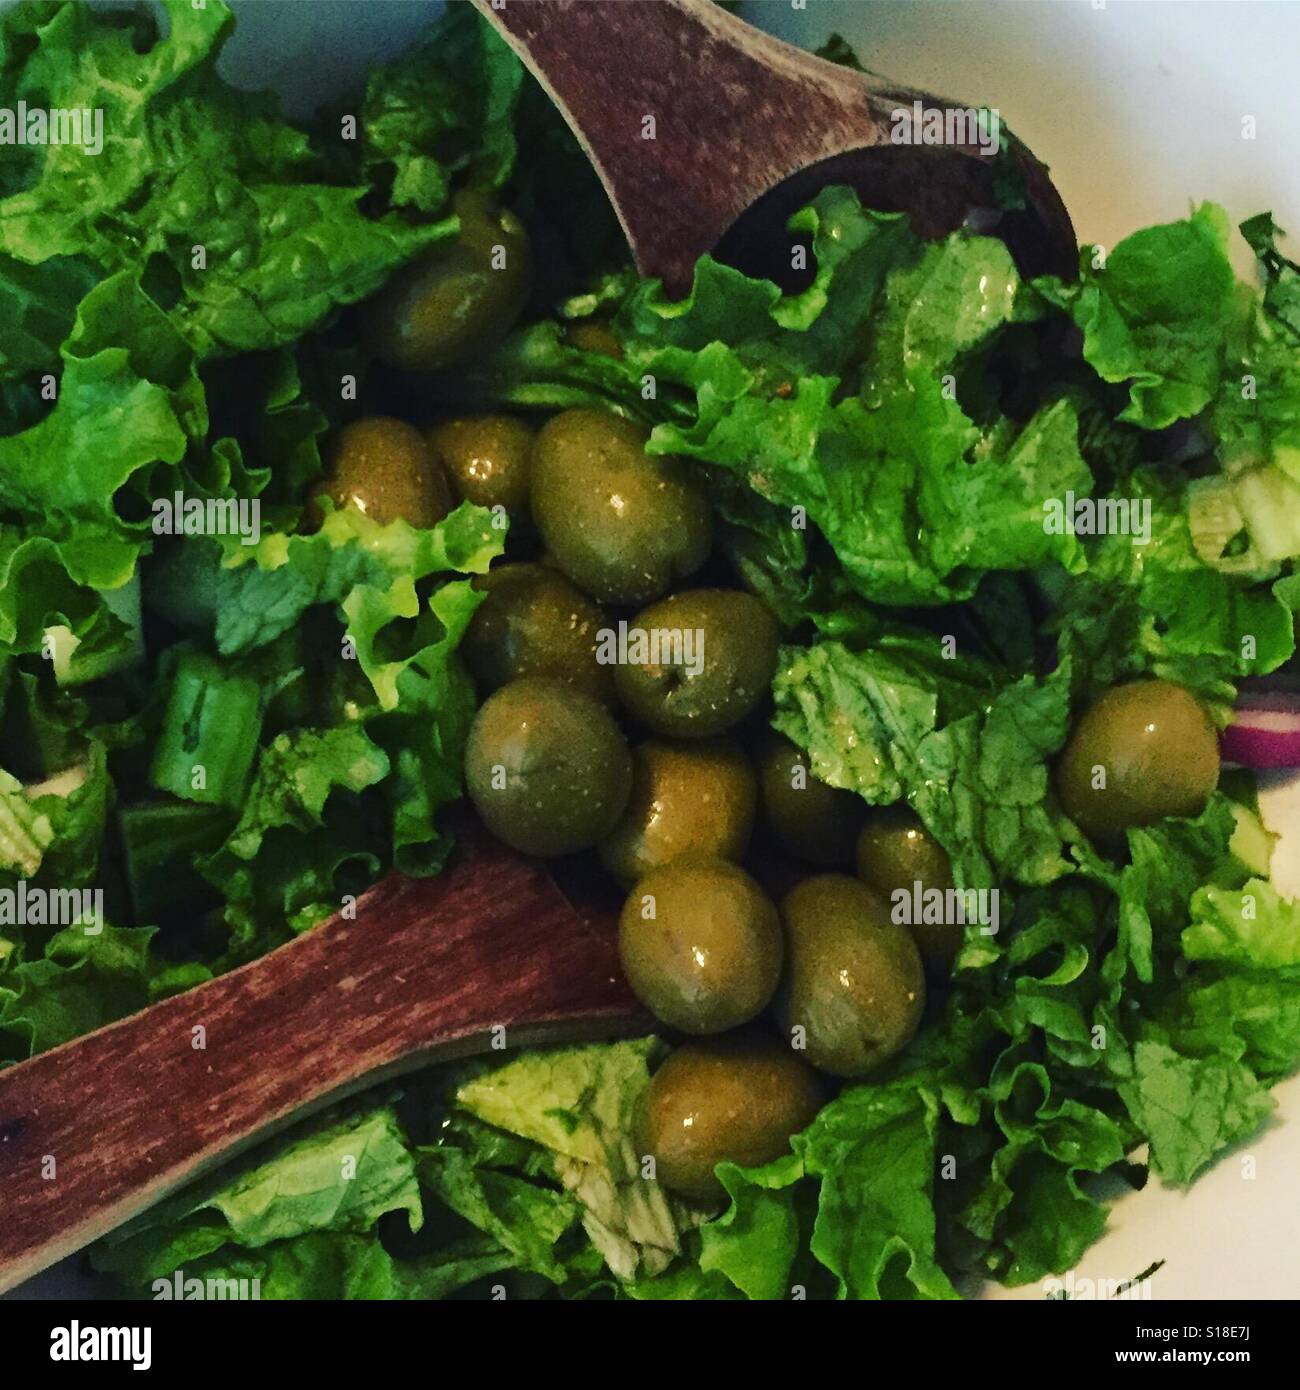 Delicious fresh organic salad by K.R. Stock Photo